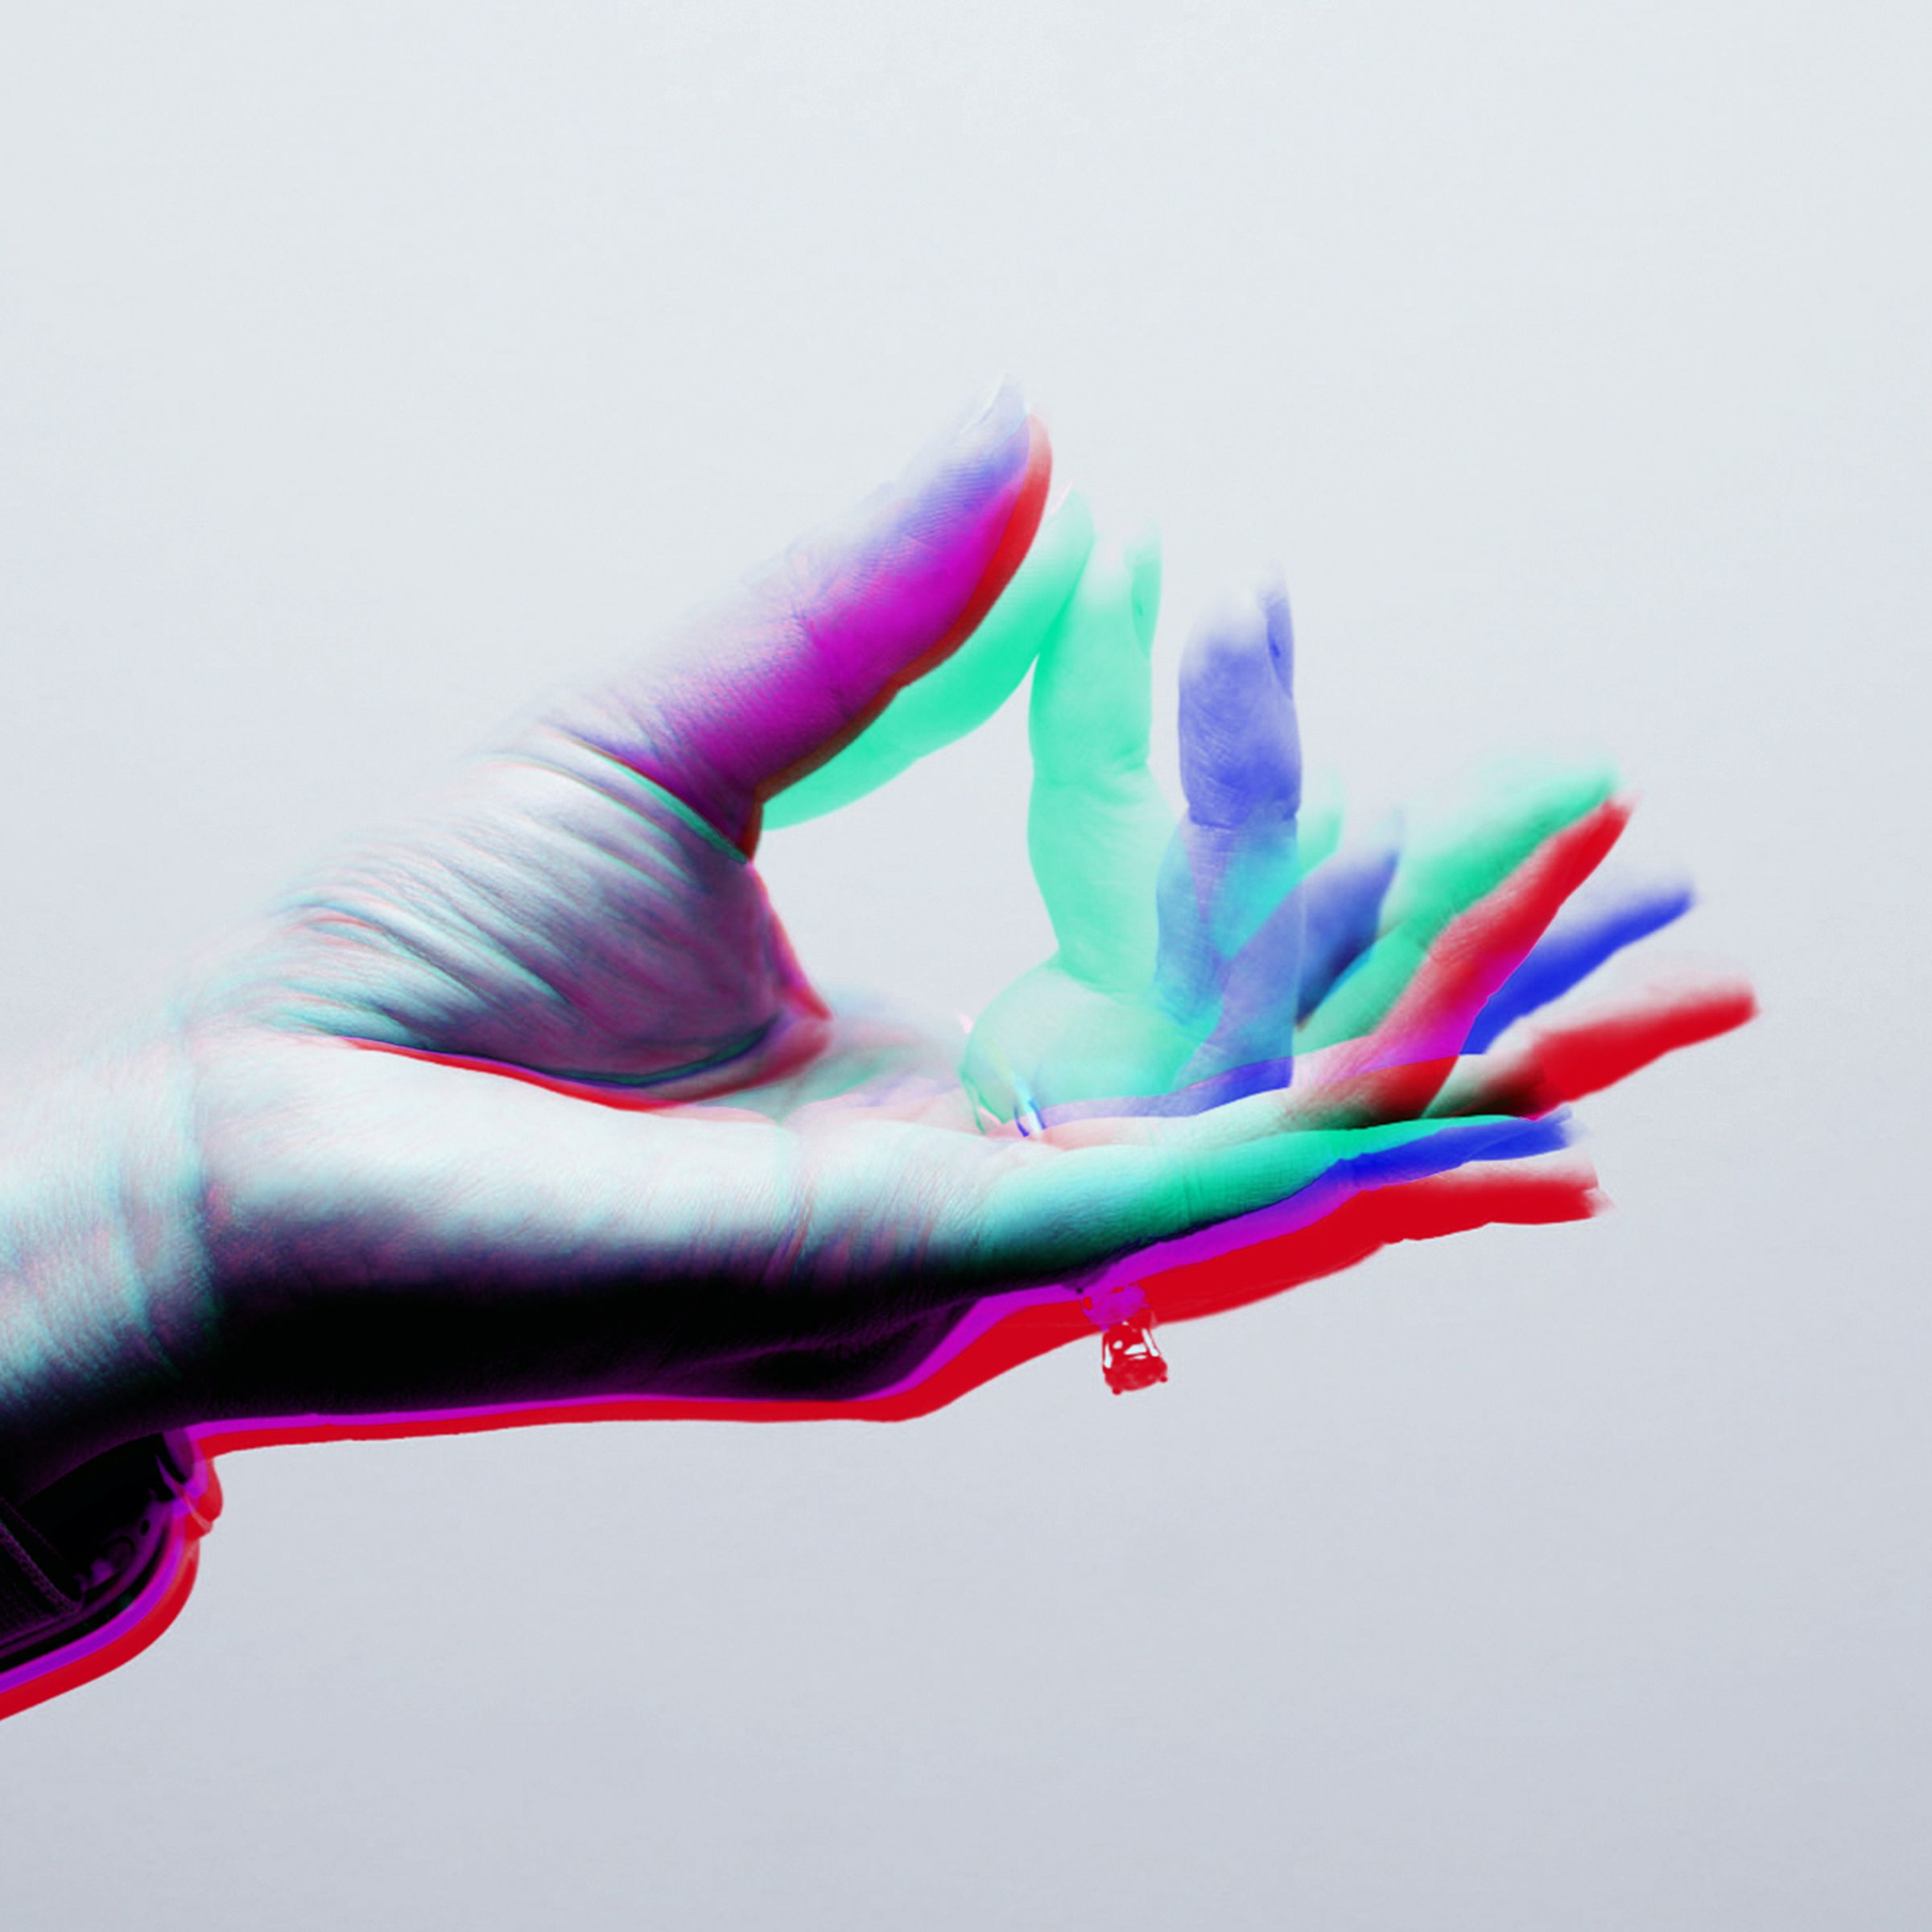 Stylized photo of person depiction the motion of the double tap gesture with the Apple Watch Ultra 2 on their wrist.